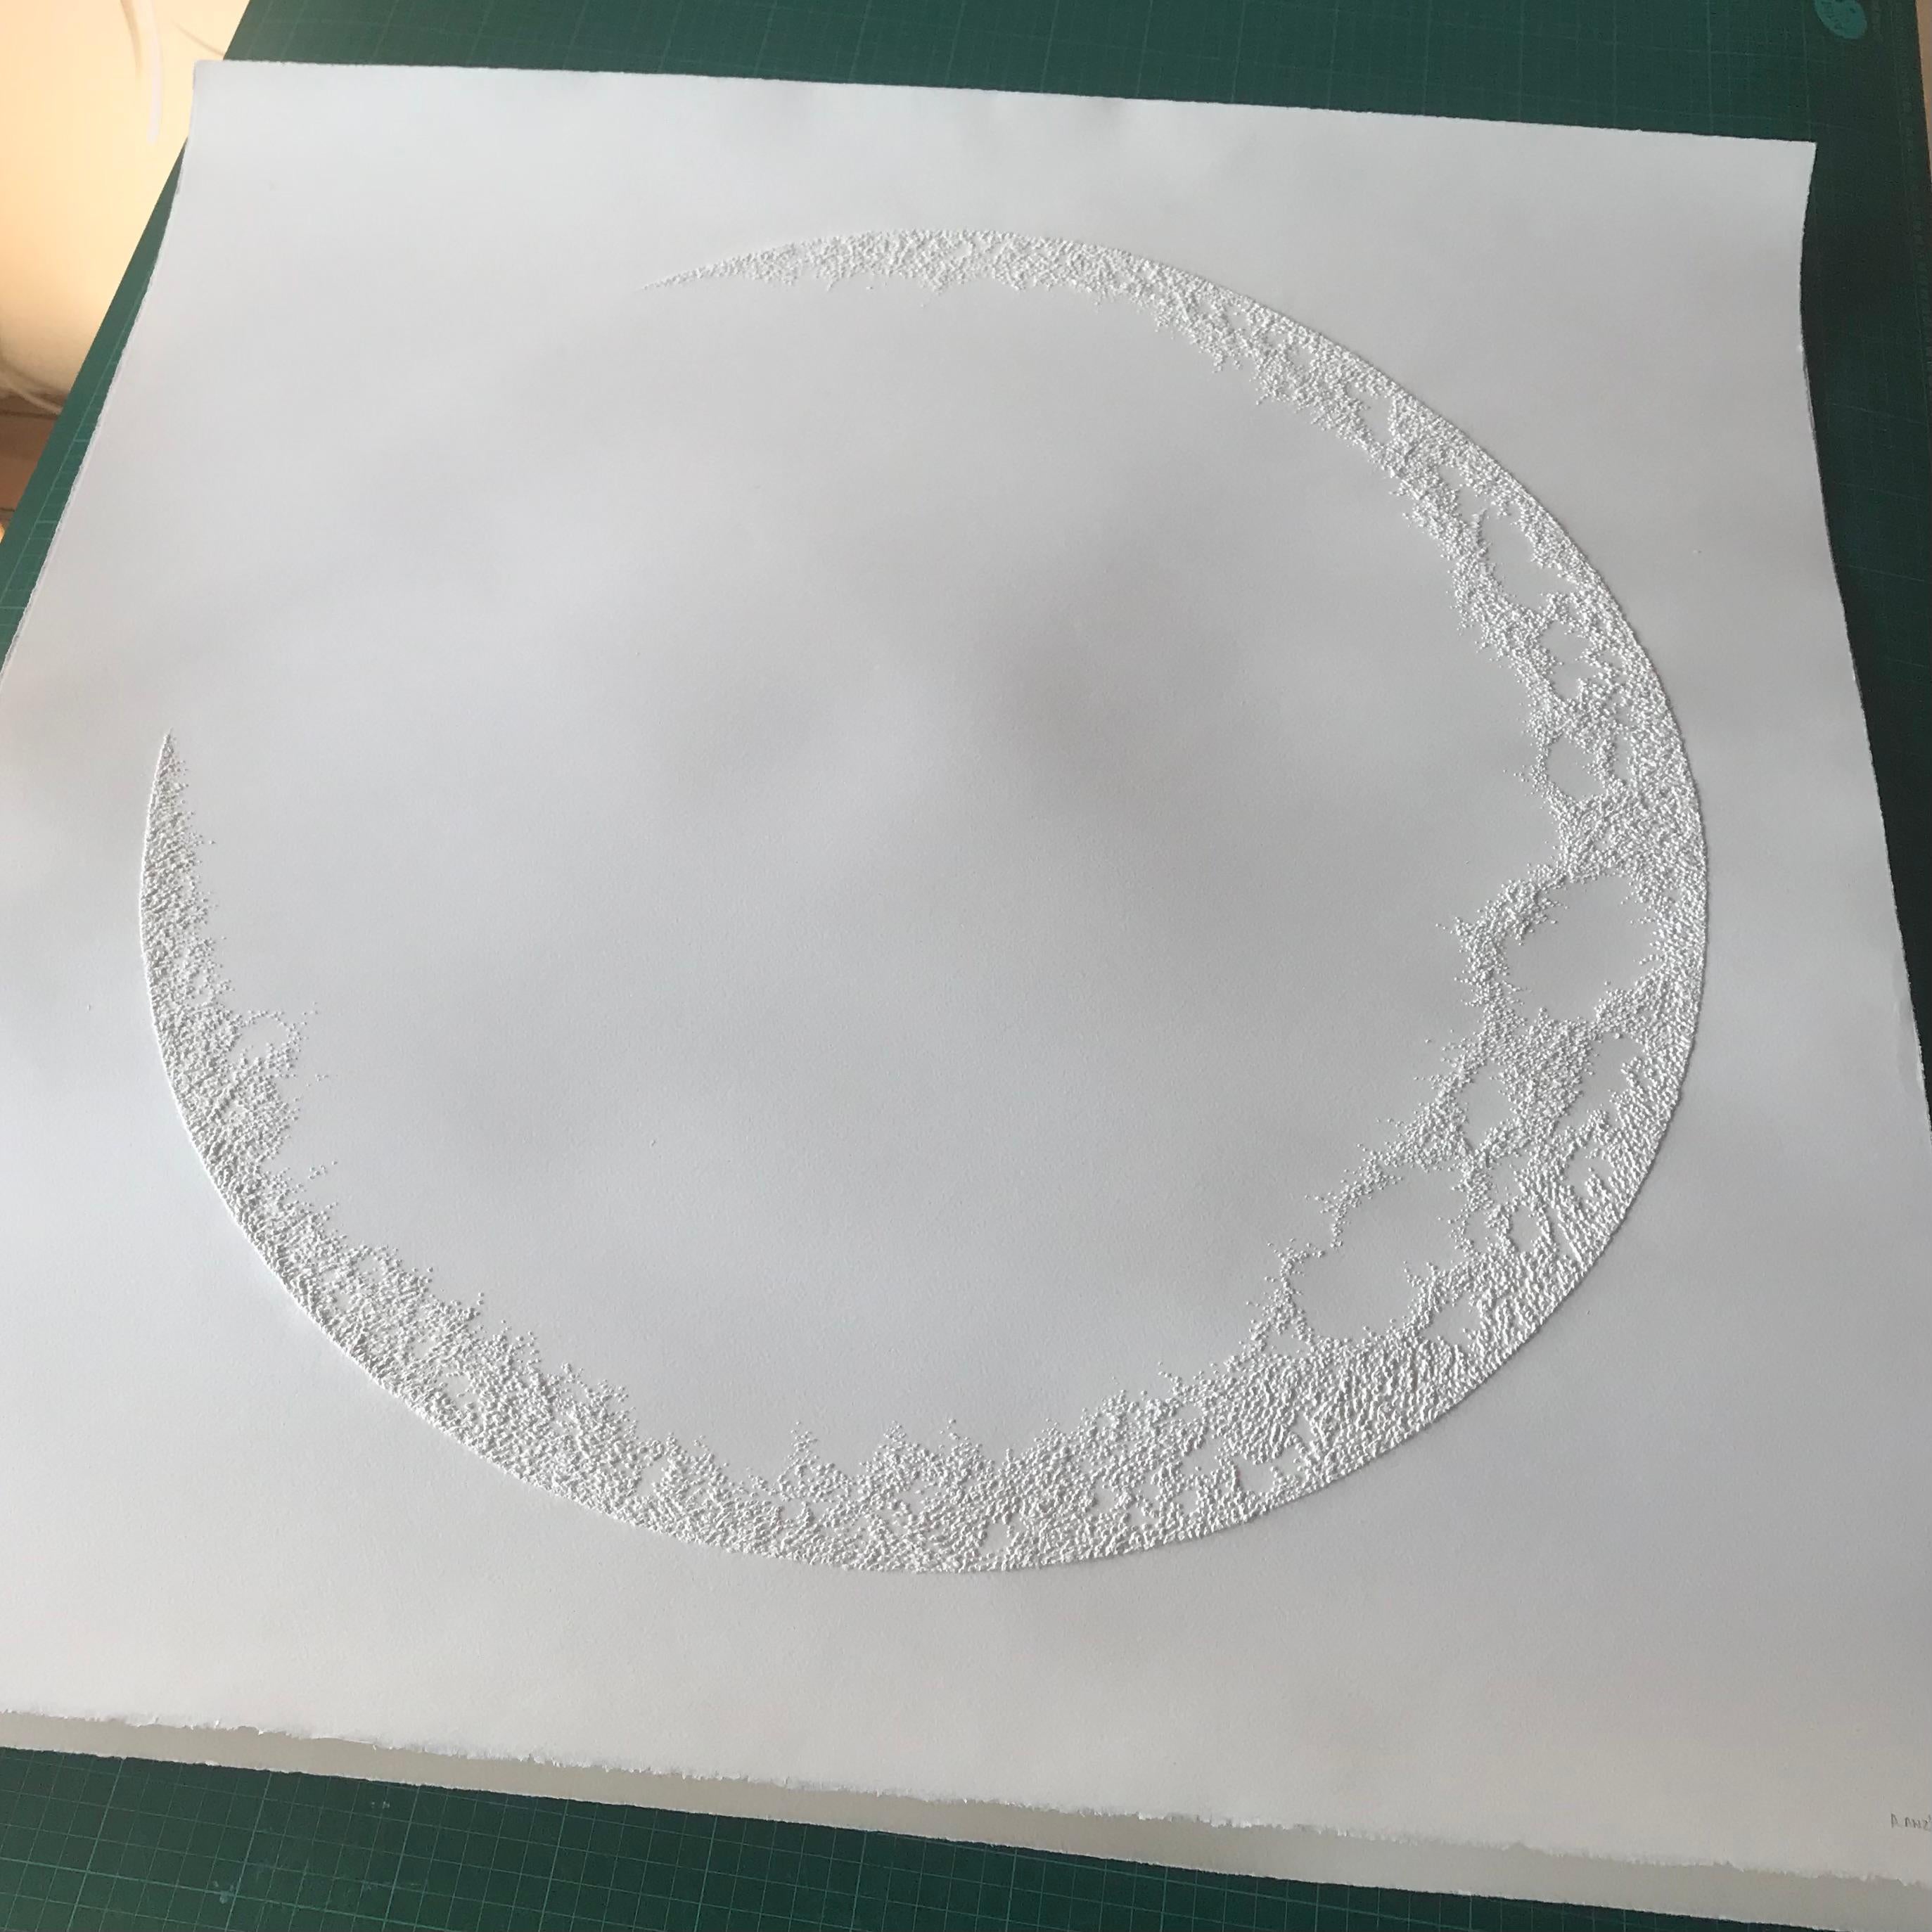 Antonin Anzil Abstract Drawing - Moon Circle 3 - intricate white 3D abstract geometric pulled paper drawing 